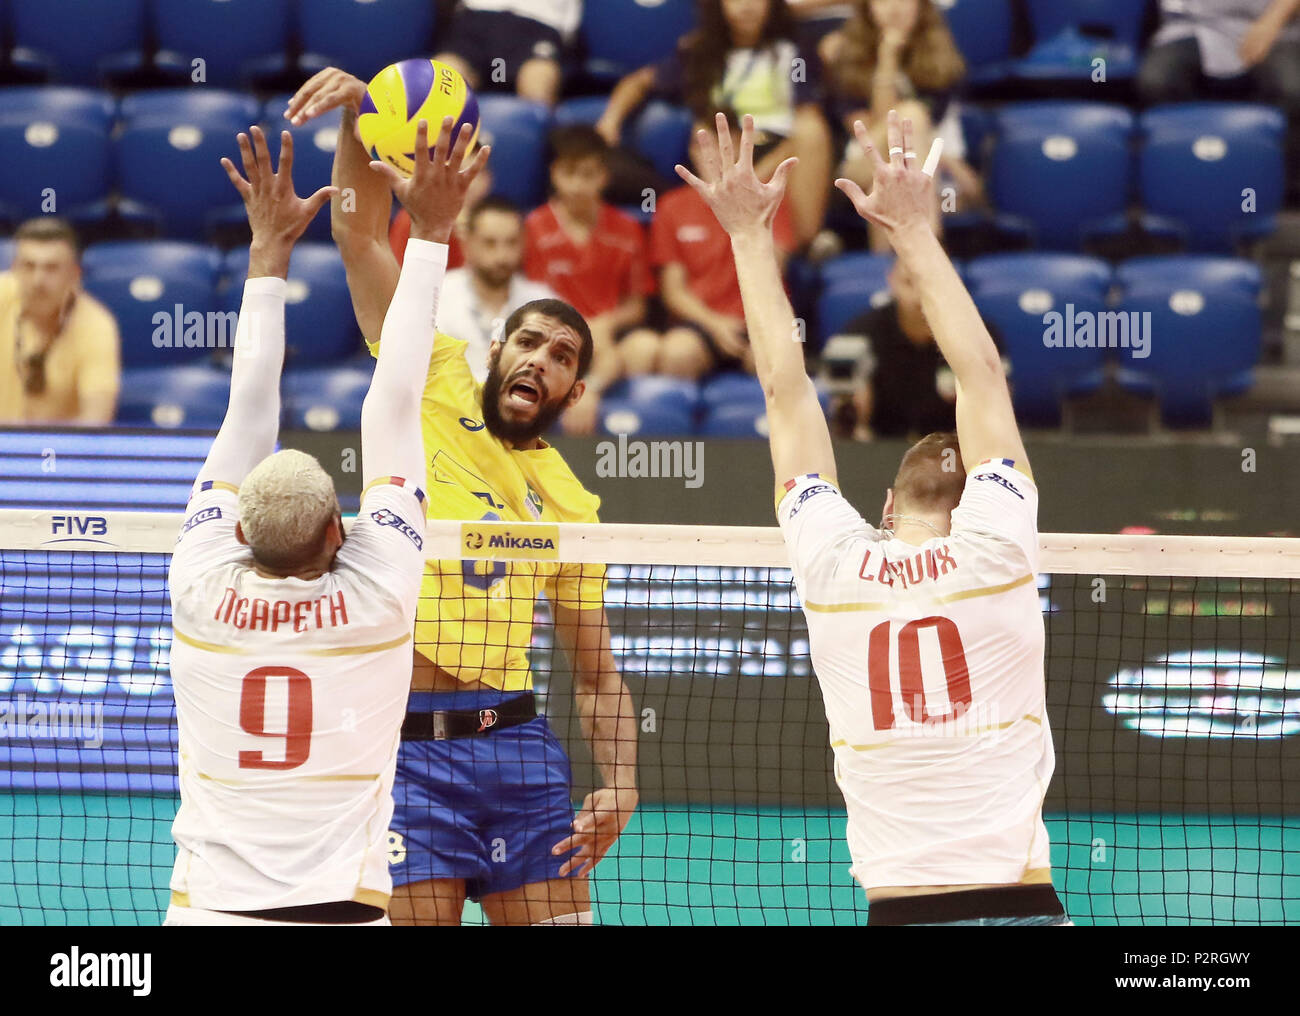 Varna, Bulgaria. 16th June, 2018. from left Earvin NGAPETH (France), Wallace de SOUZA (Brazil), Kevin LE ROUX (France), .mens Volleyball Nations League, week 4, Brazil vs Francel, Palace of culture and sport, Varna/Bulgaria, June 16, 2018, the fourth of 5 weekends of the preliminary lap in the new established mens Volleyball Nationas League takes place in Varna/Bulgaria. Credit: Wolfgang Fehrmann/ZUMA Wire/Alamy Live News Stock Photo